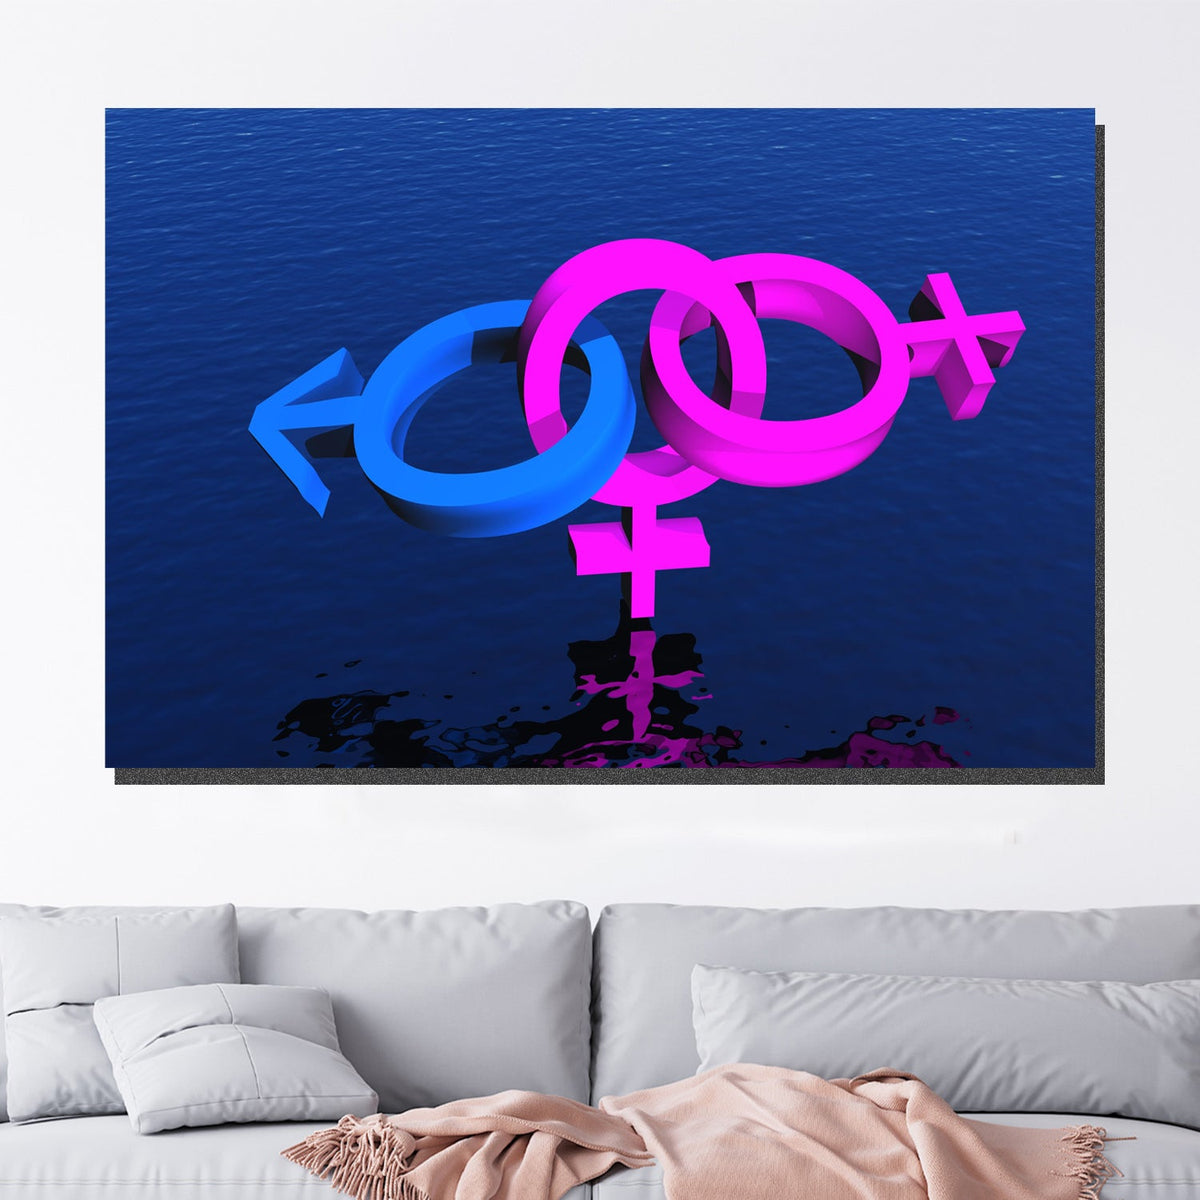 https://cdn.shopify.com/s/files/1/0387/9986/8044/products/BisexualWomanSymbolCanvasArtprintStretched-3.jpg